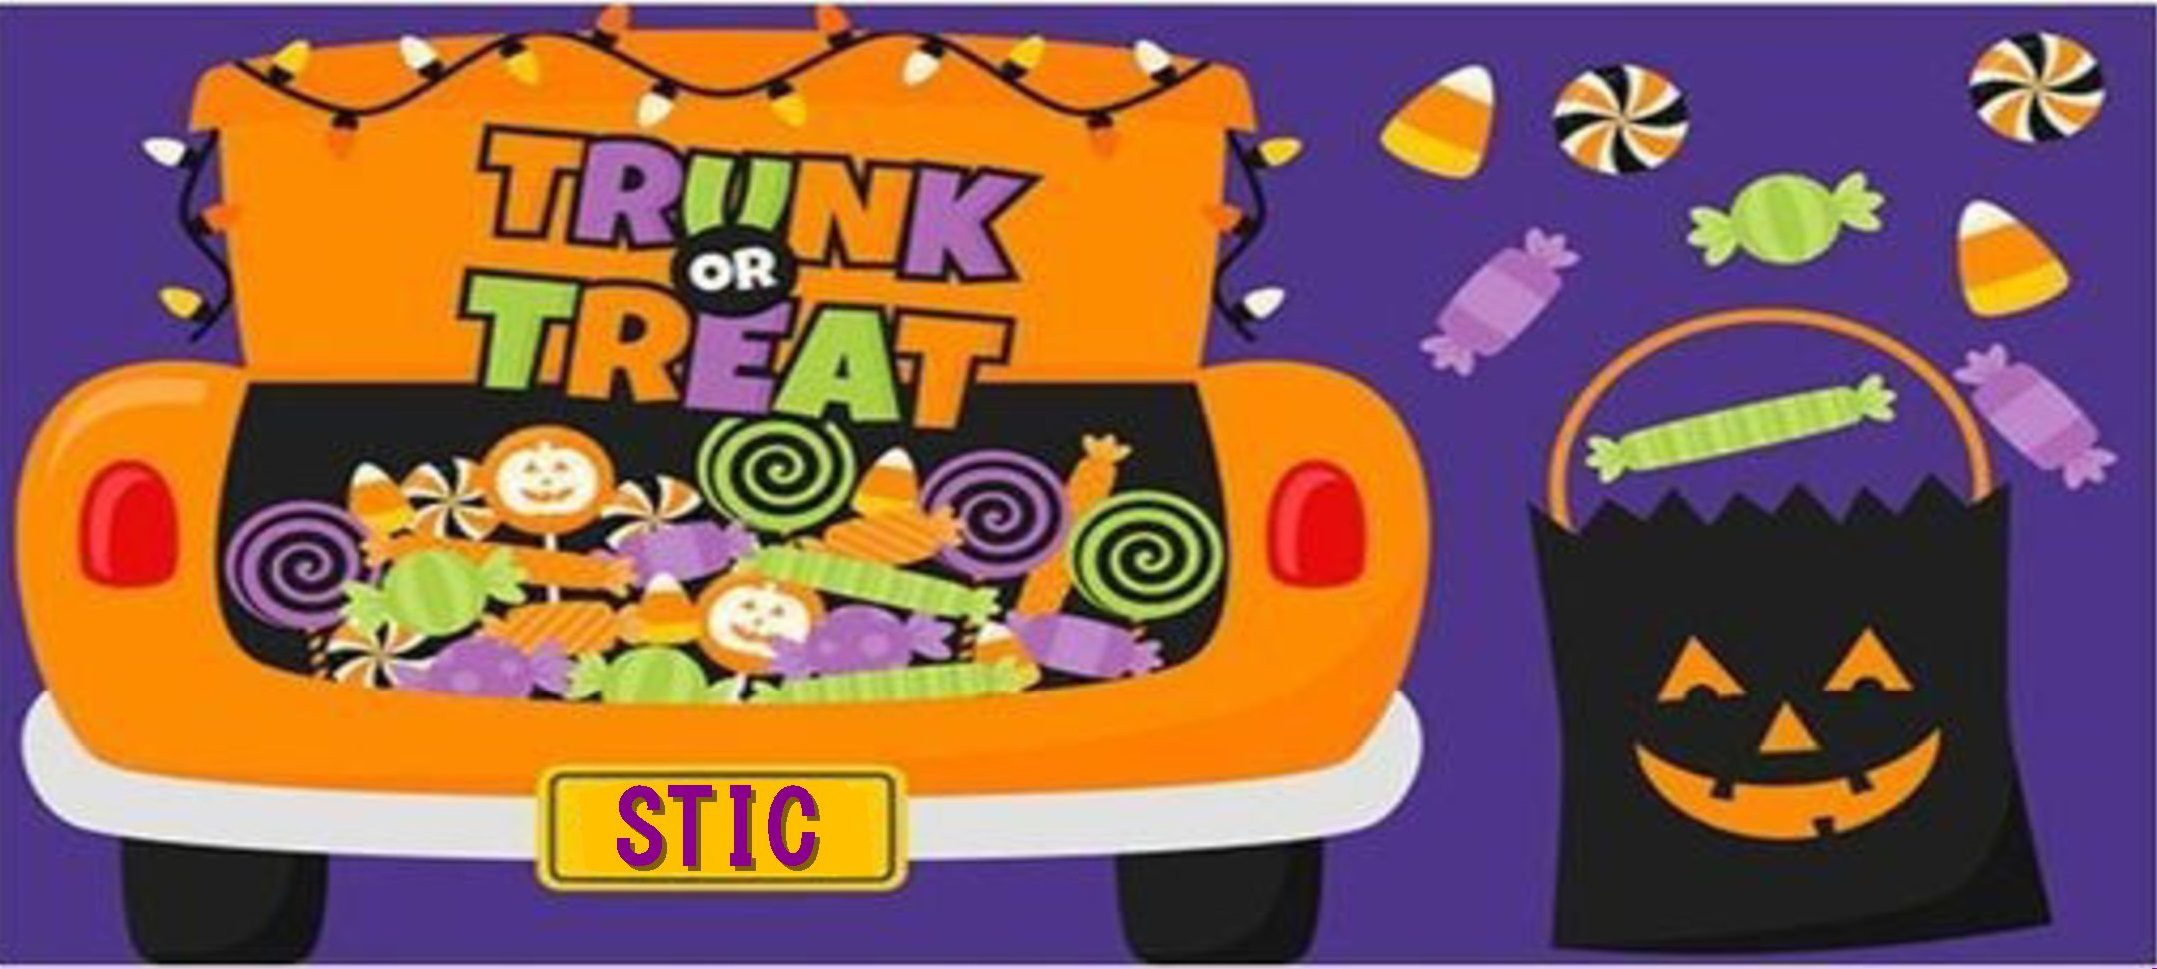 Trunk Or Treat at STIC